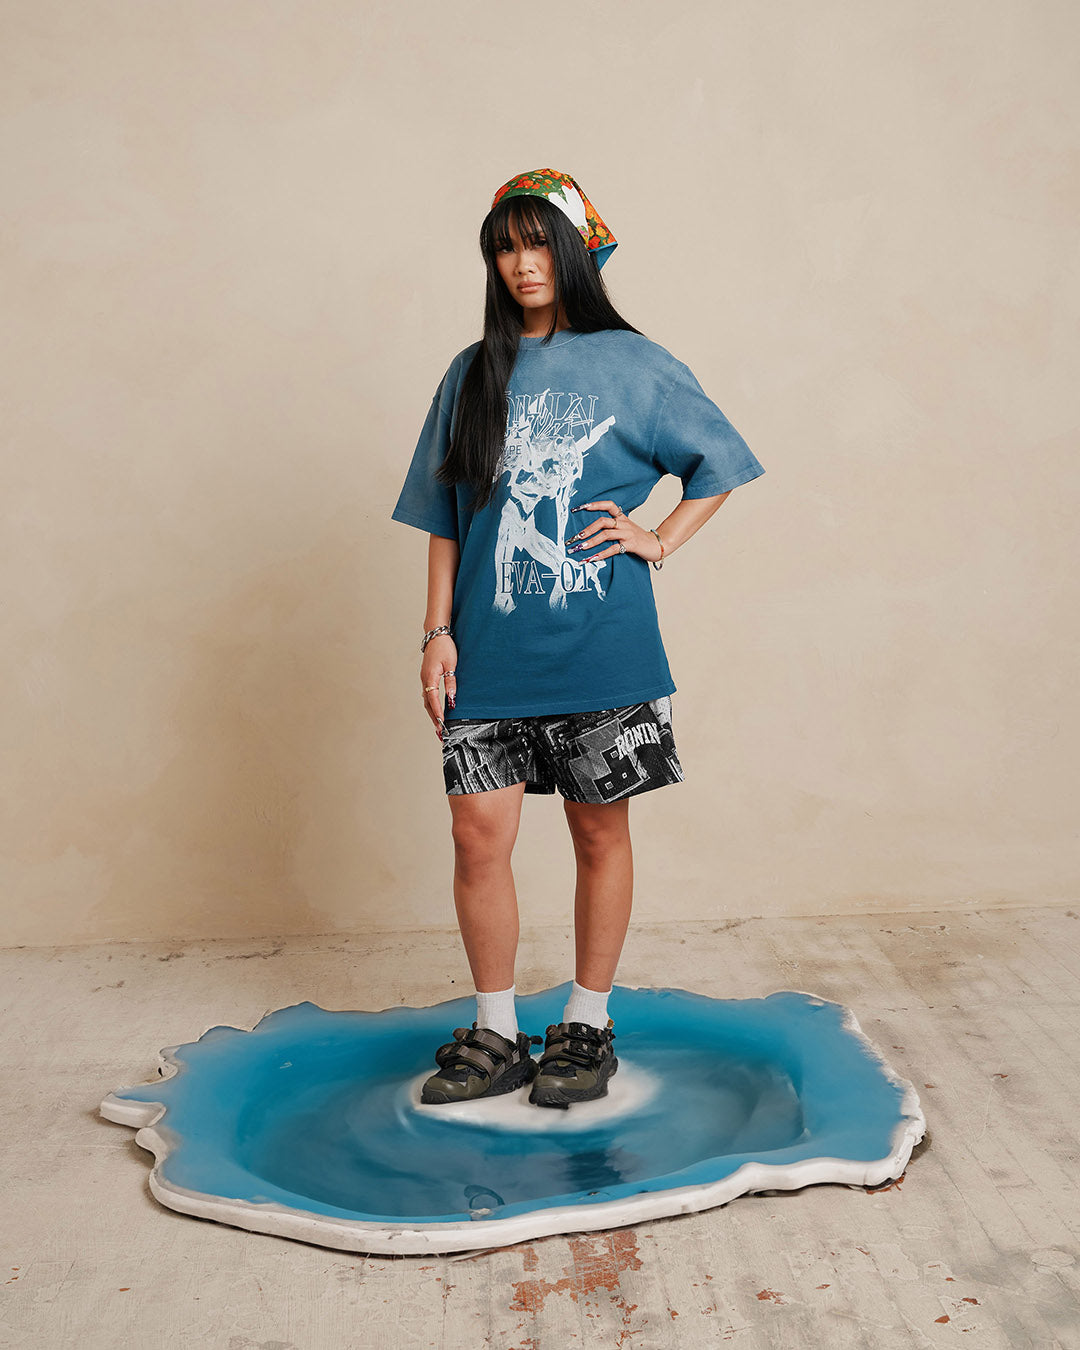 Load image into Gallery viewer, Test Type Sundyed Tee - Aqua
